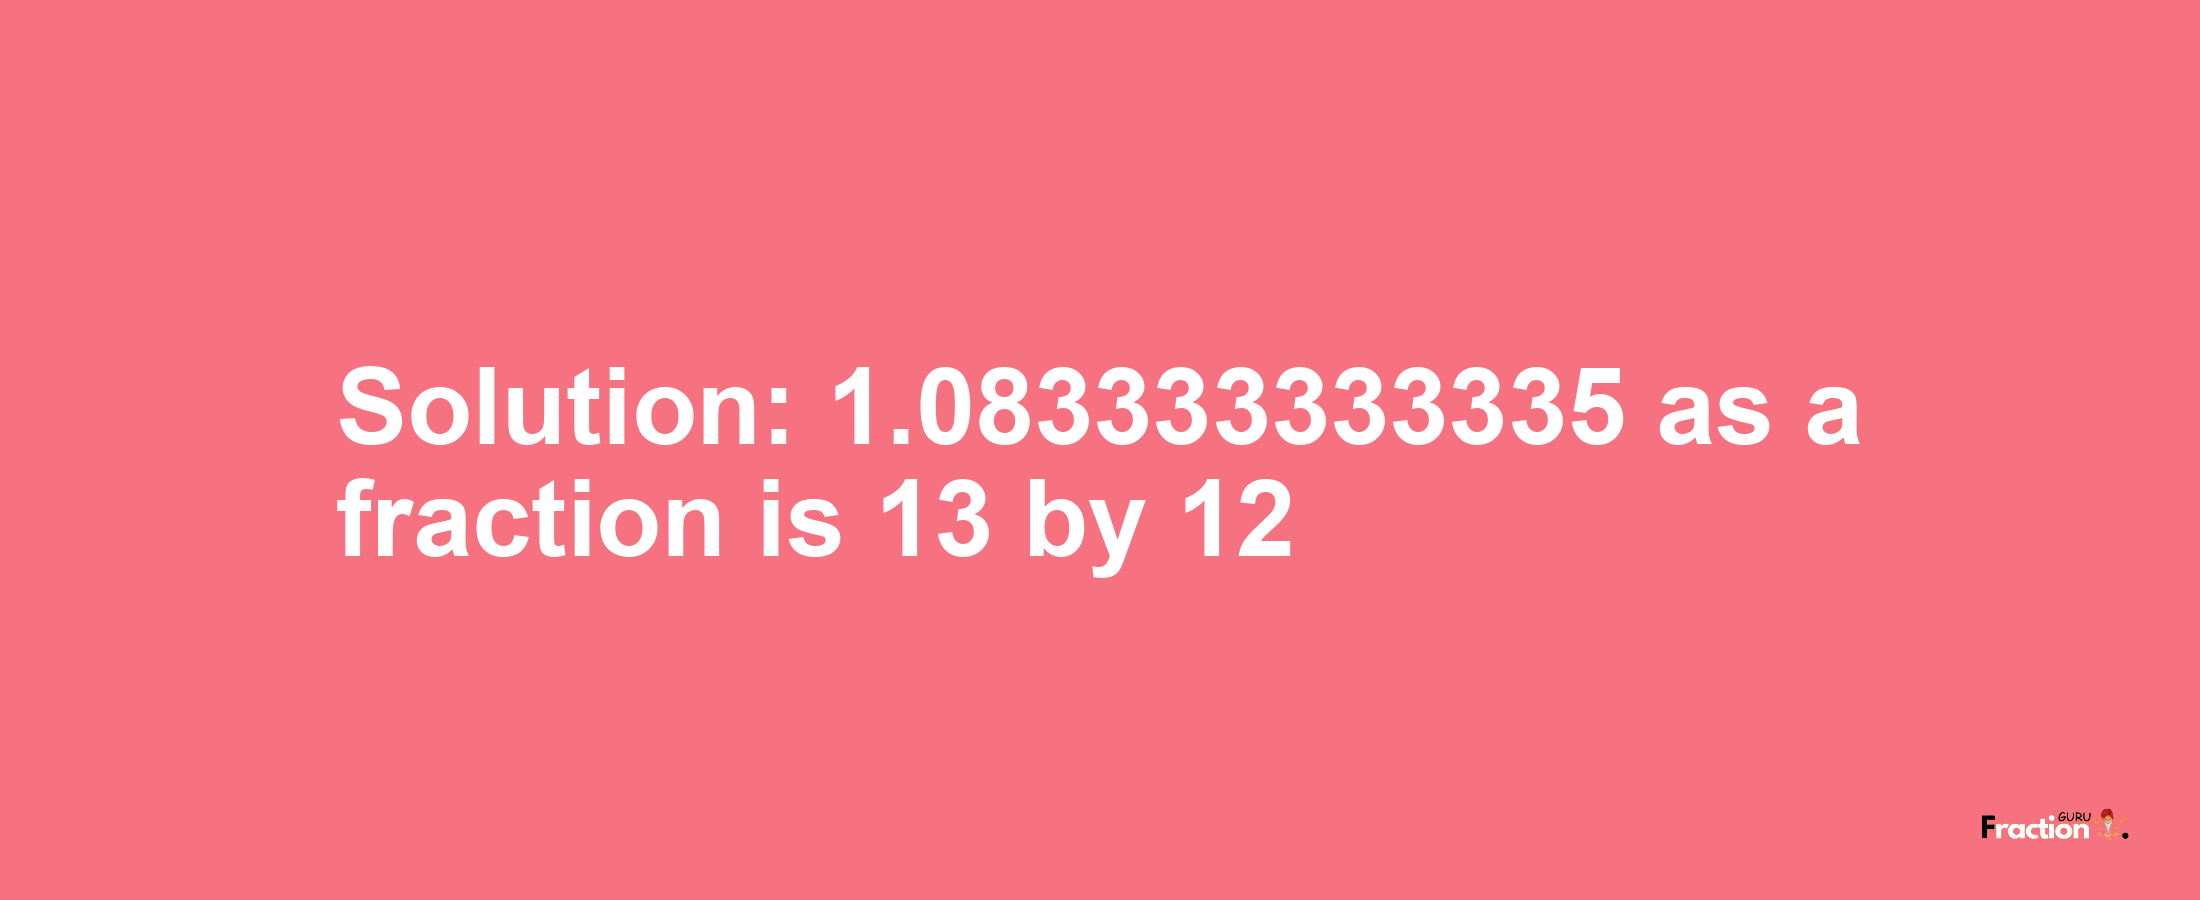 Solution:1.083333333335 as a fraction is 13/12